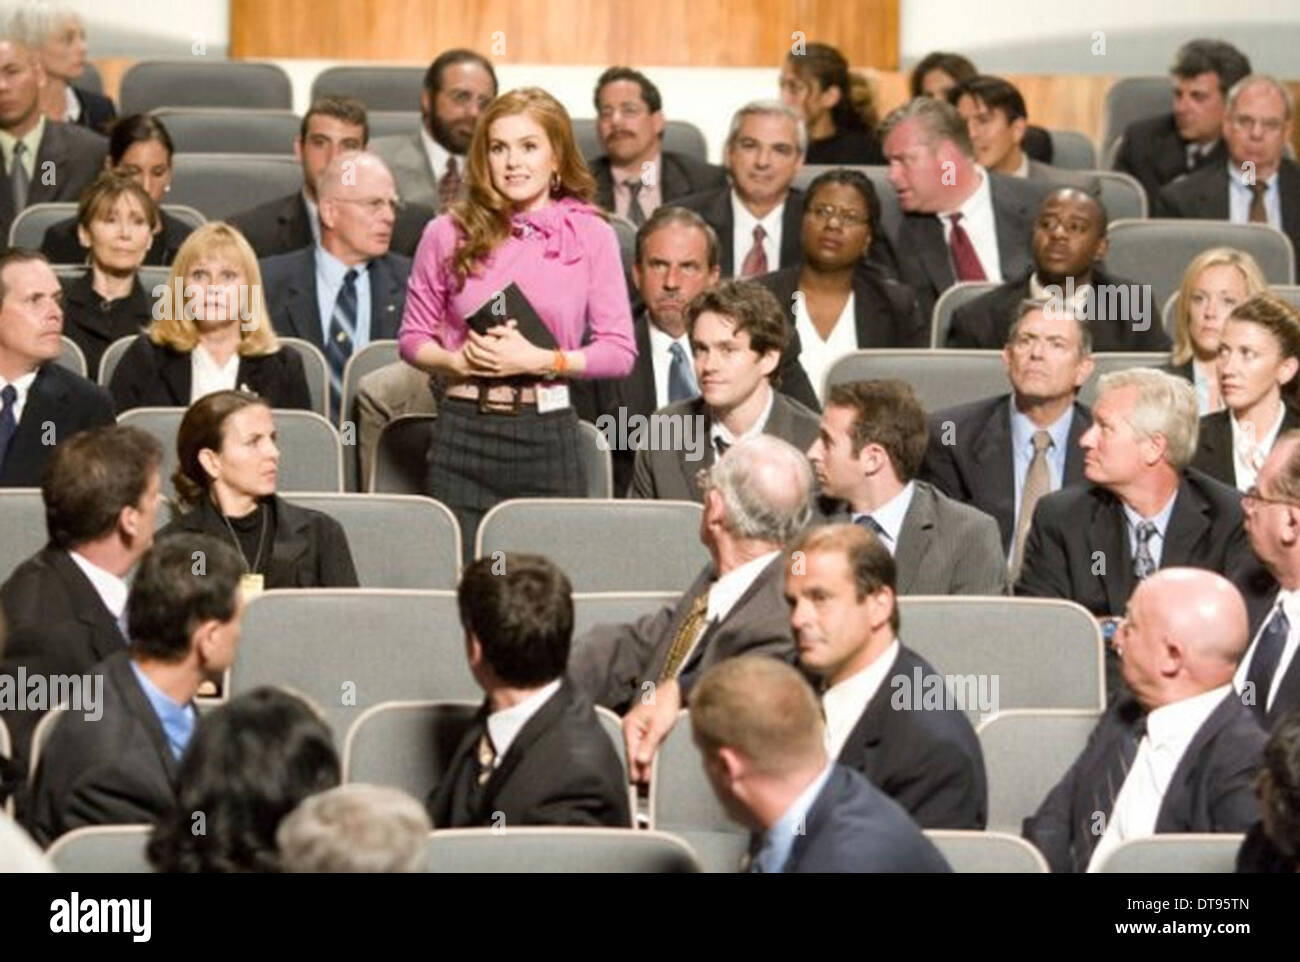 CONFESSIONS OF A SHOPAHOLIC  2009 Touchstone Pictures film with Isla Fisher Stock Photo